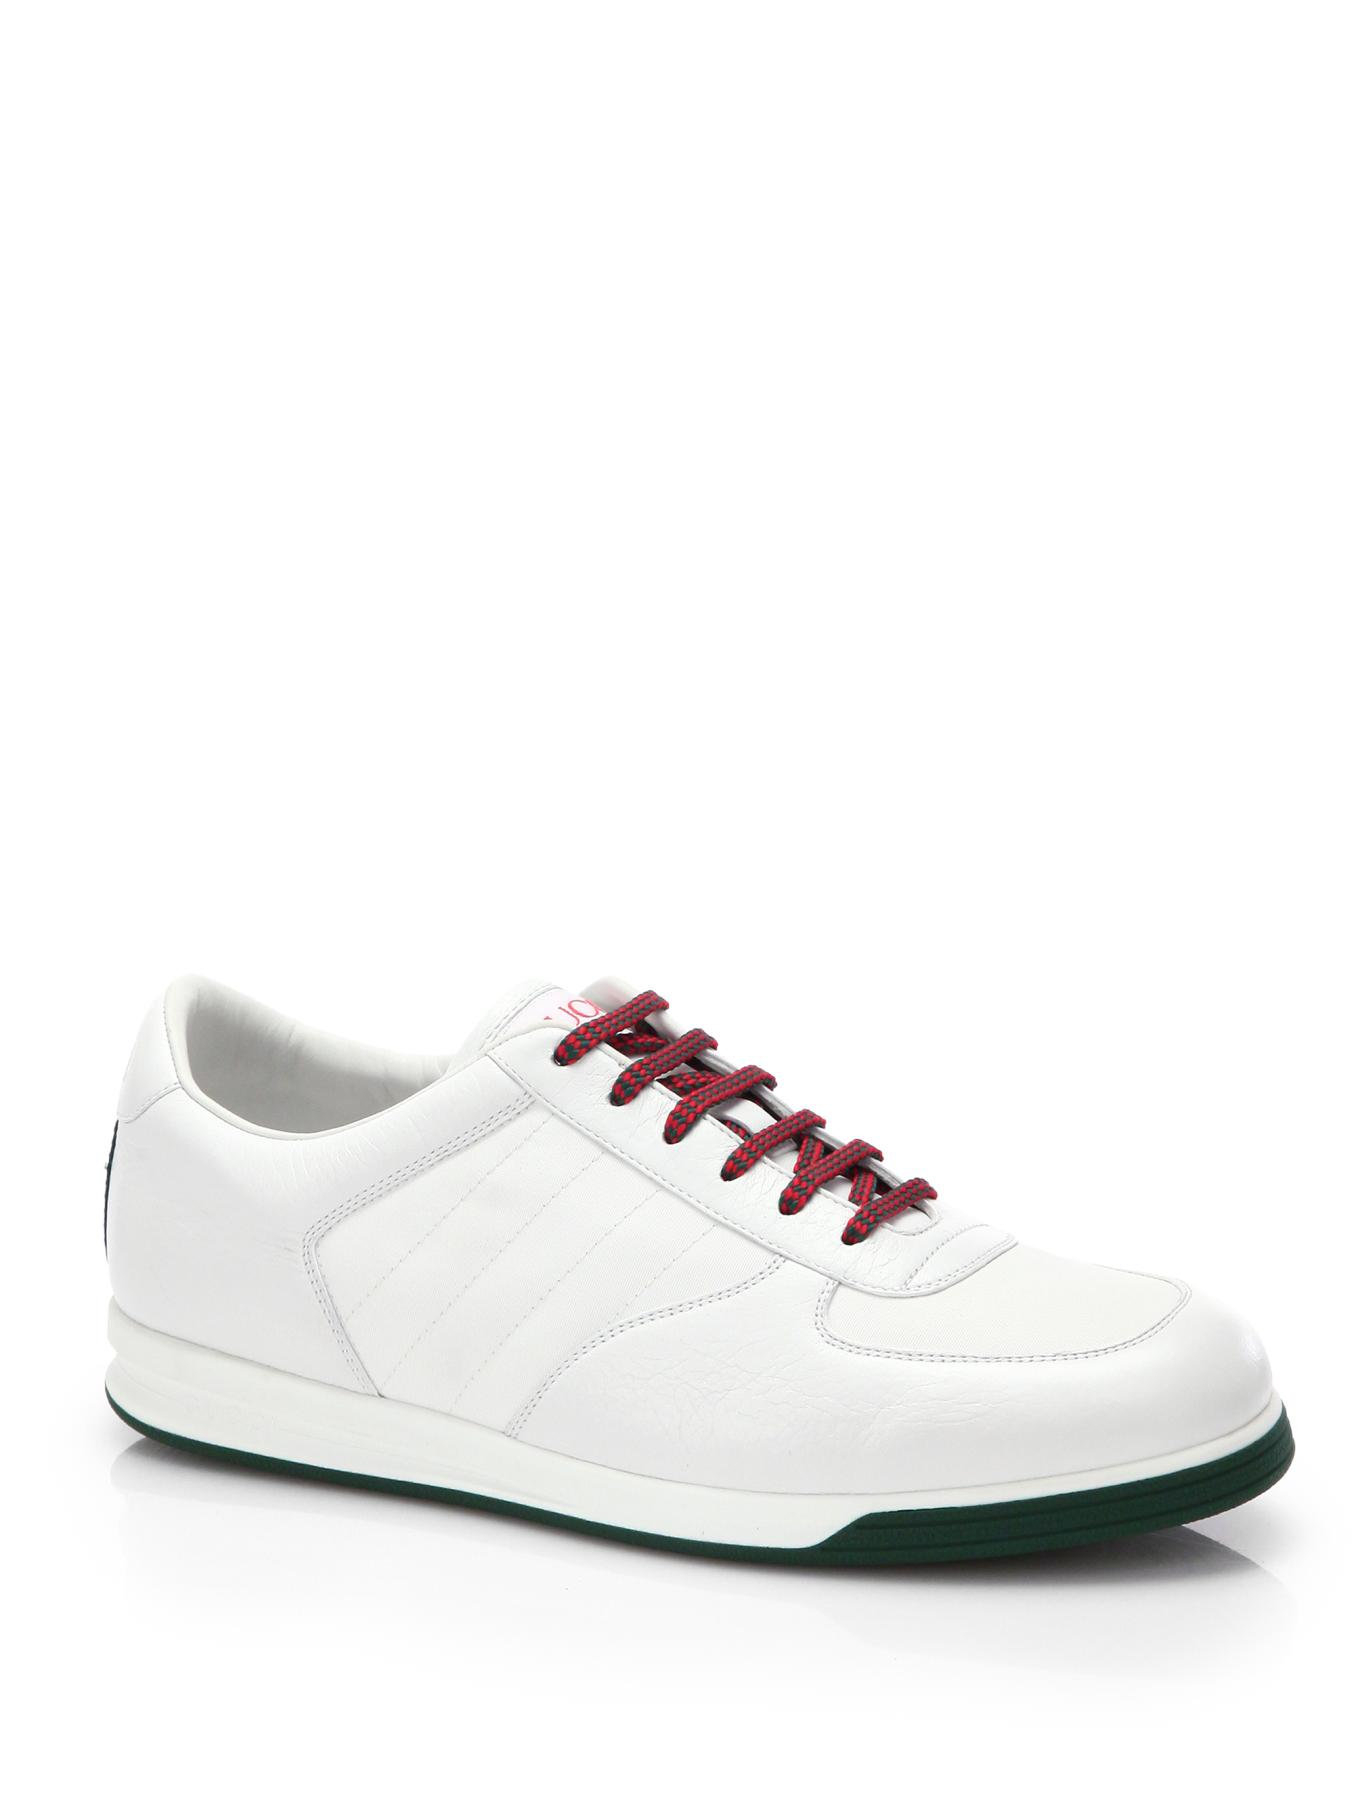 Gucci 1984 Leather Anniversary Sneakers in White for Men - Lyst